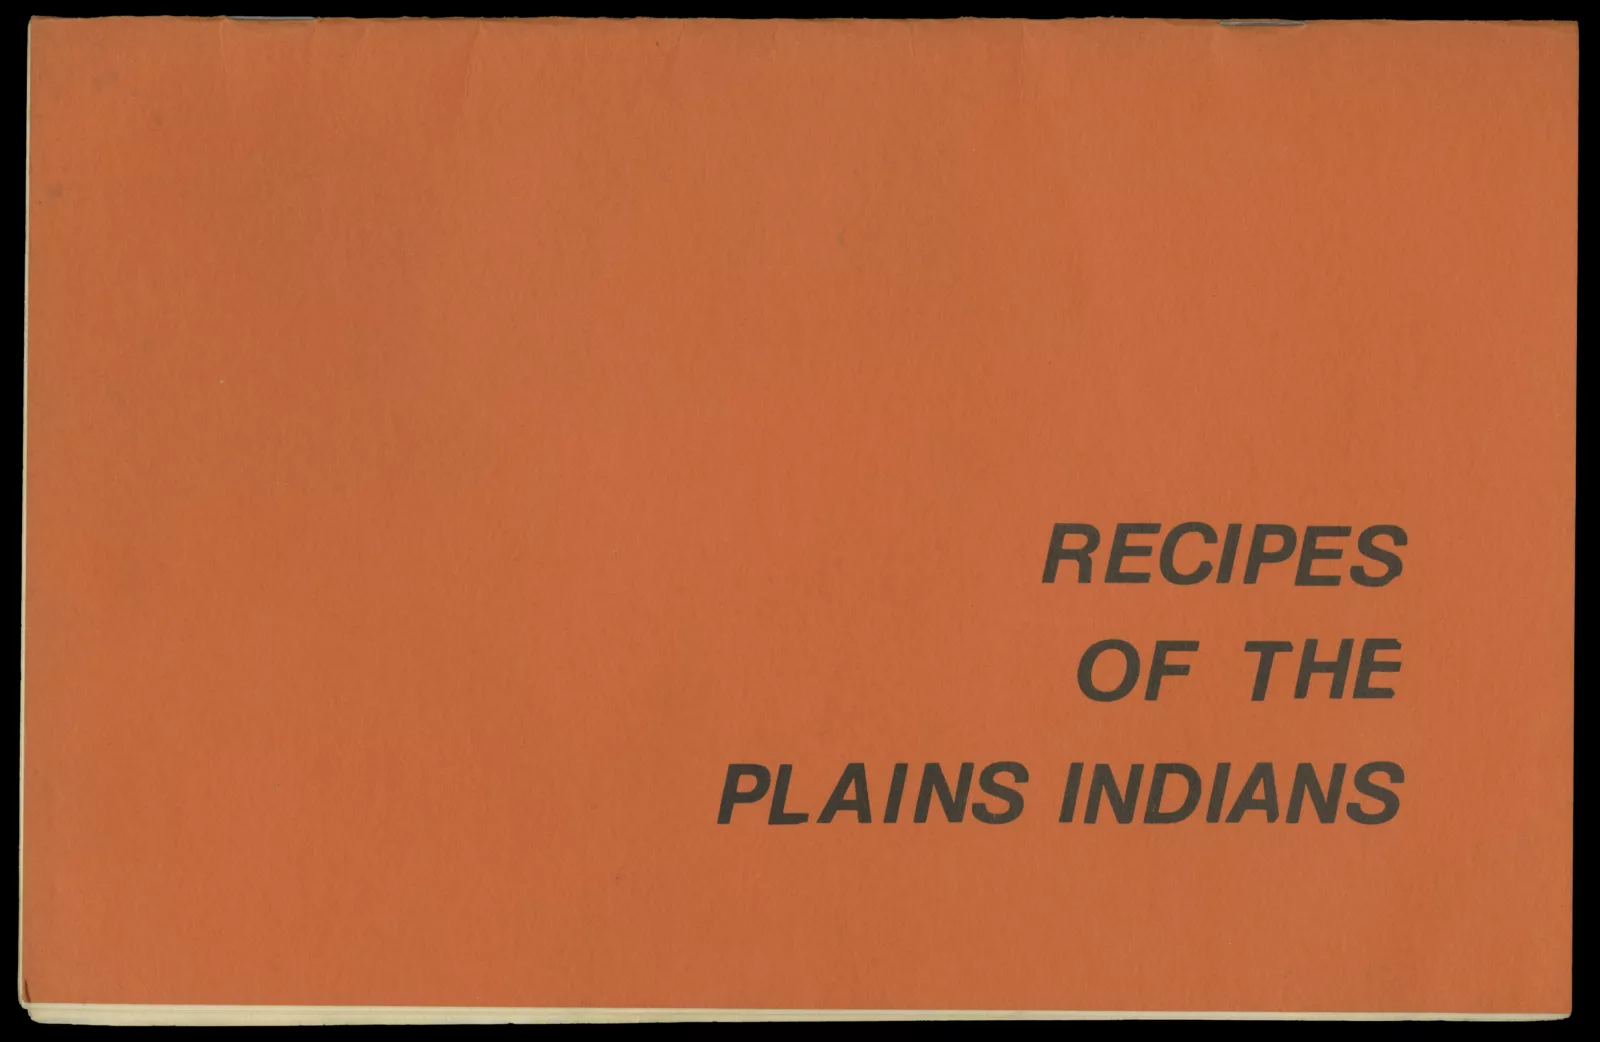 A landscape-oriented pamphlet. The cover is orange and reads "Recipes of the Plains Indians."